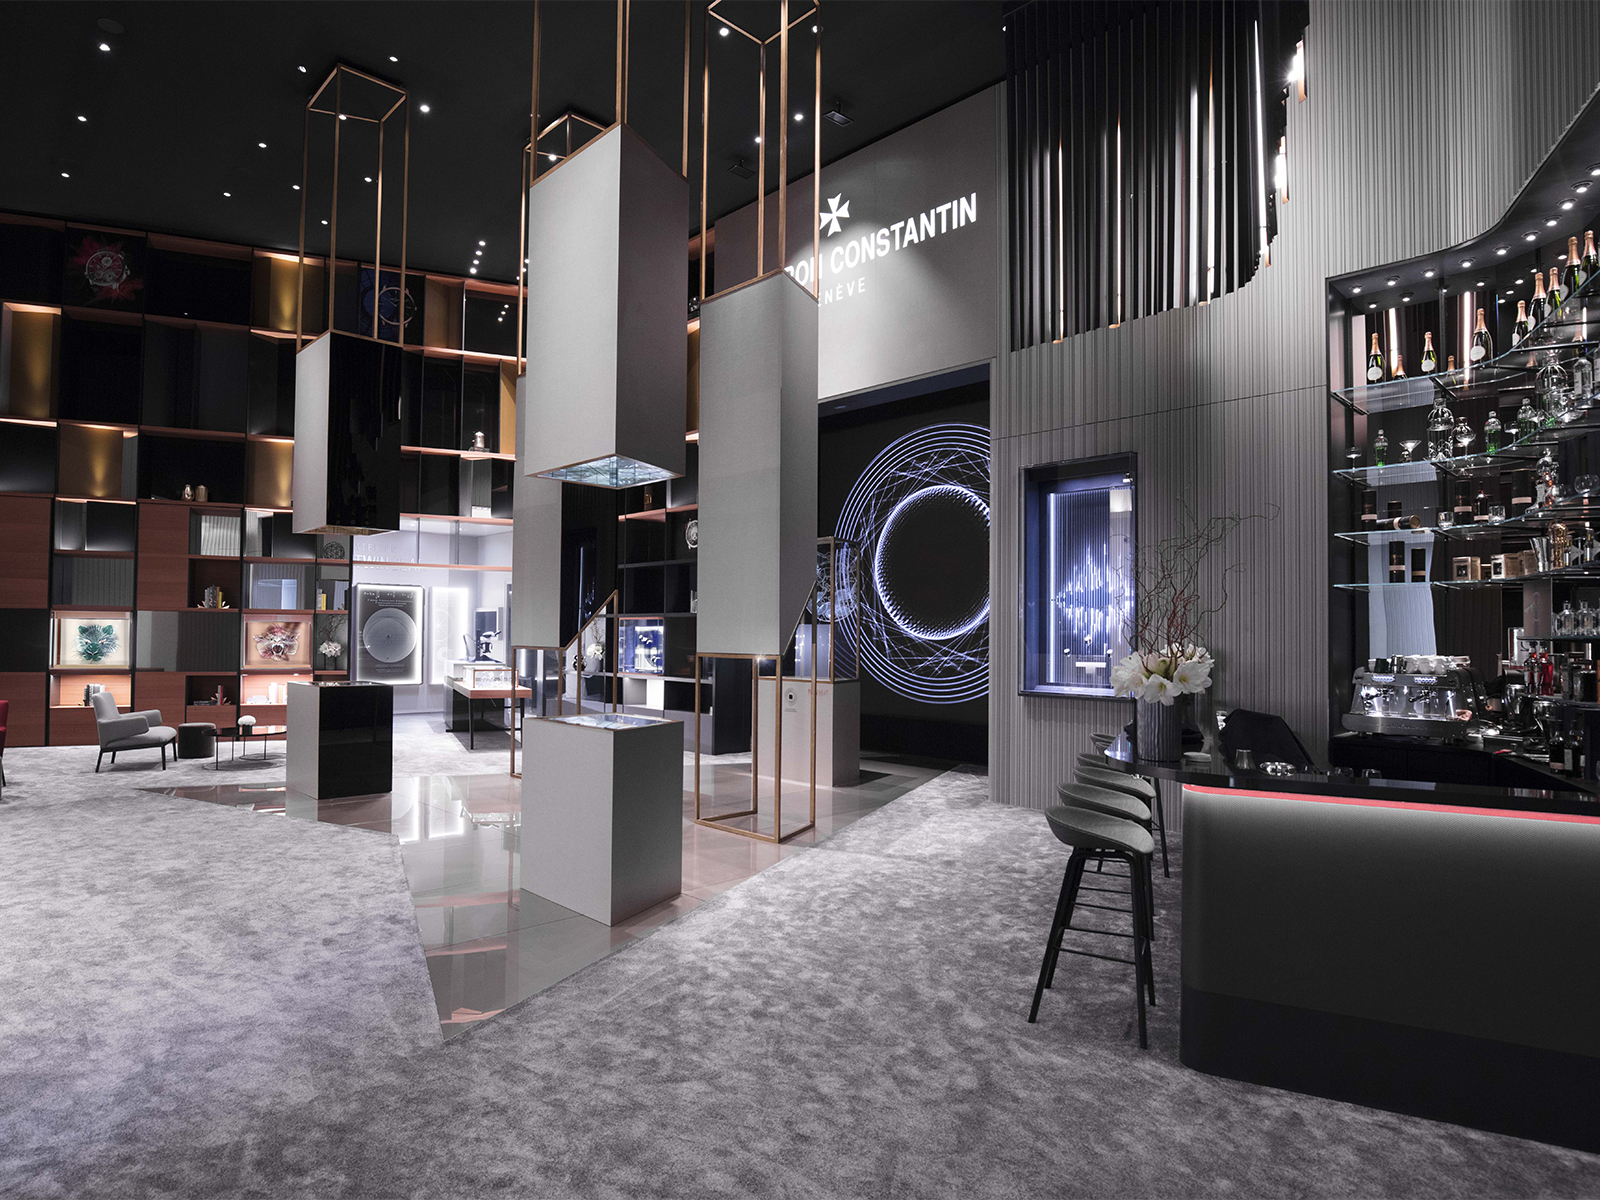 The Vacheron Constantin booth at Watches & Wonders 2023 